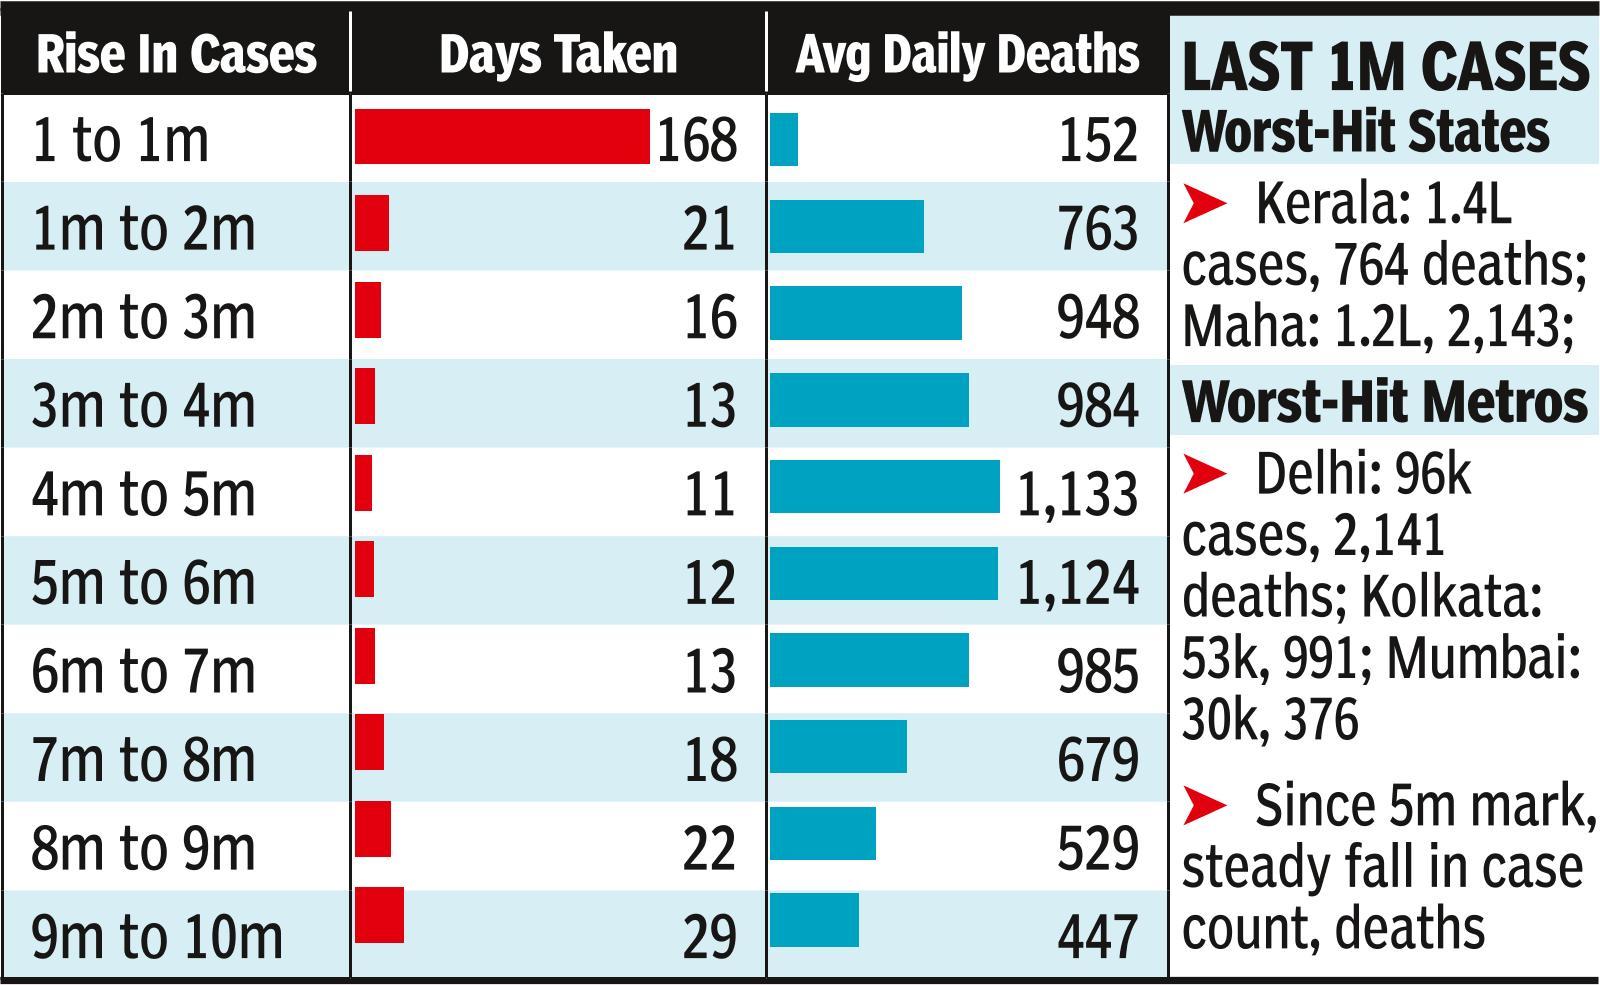 India cases cross 1cr 323 days after 1st, last 1m 2nd slowest